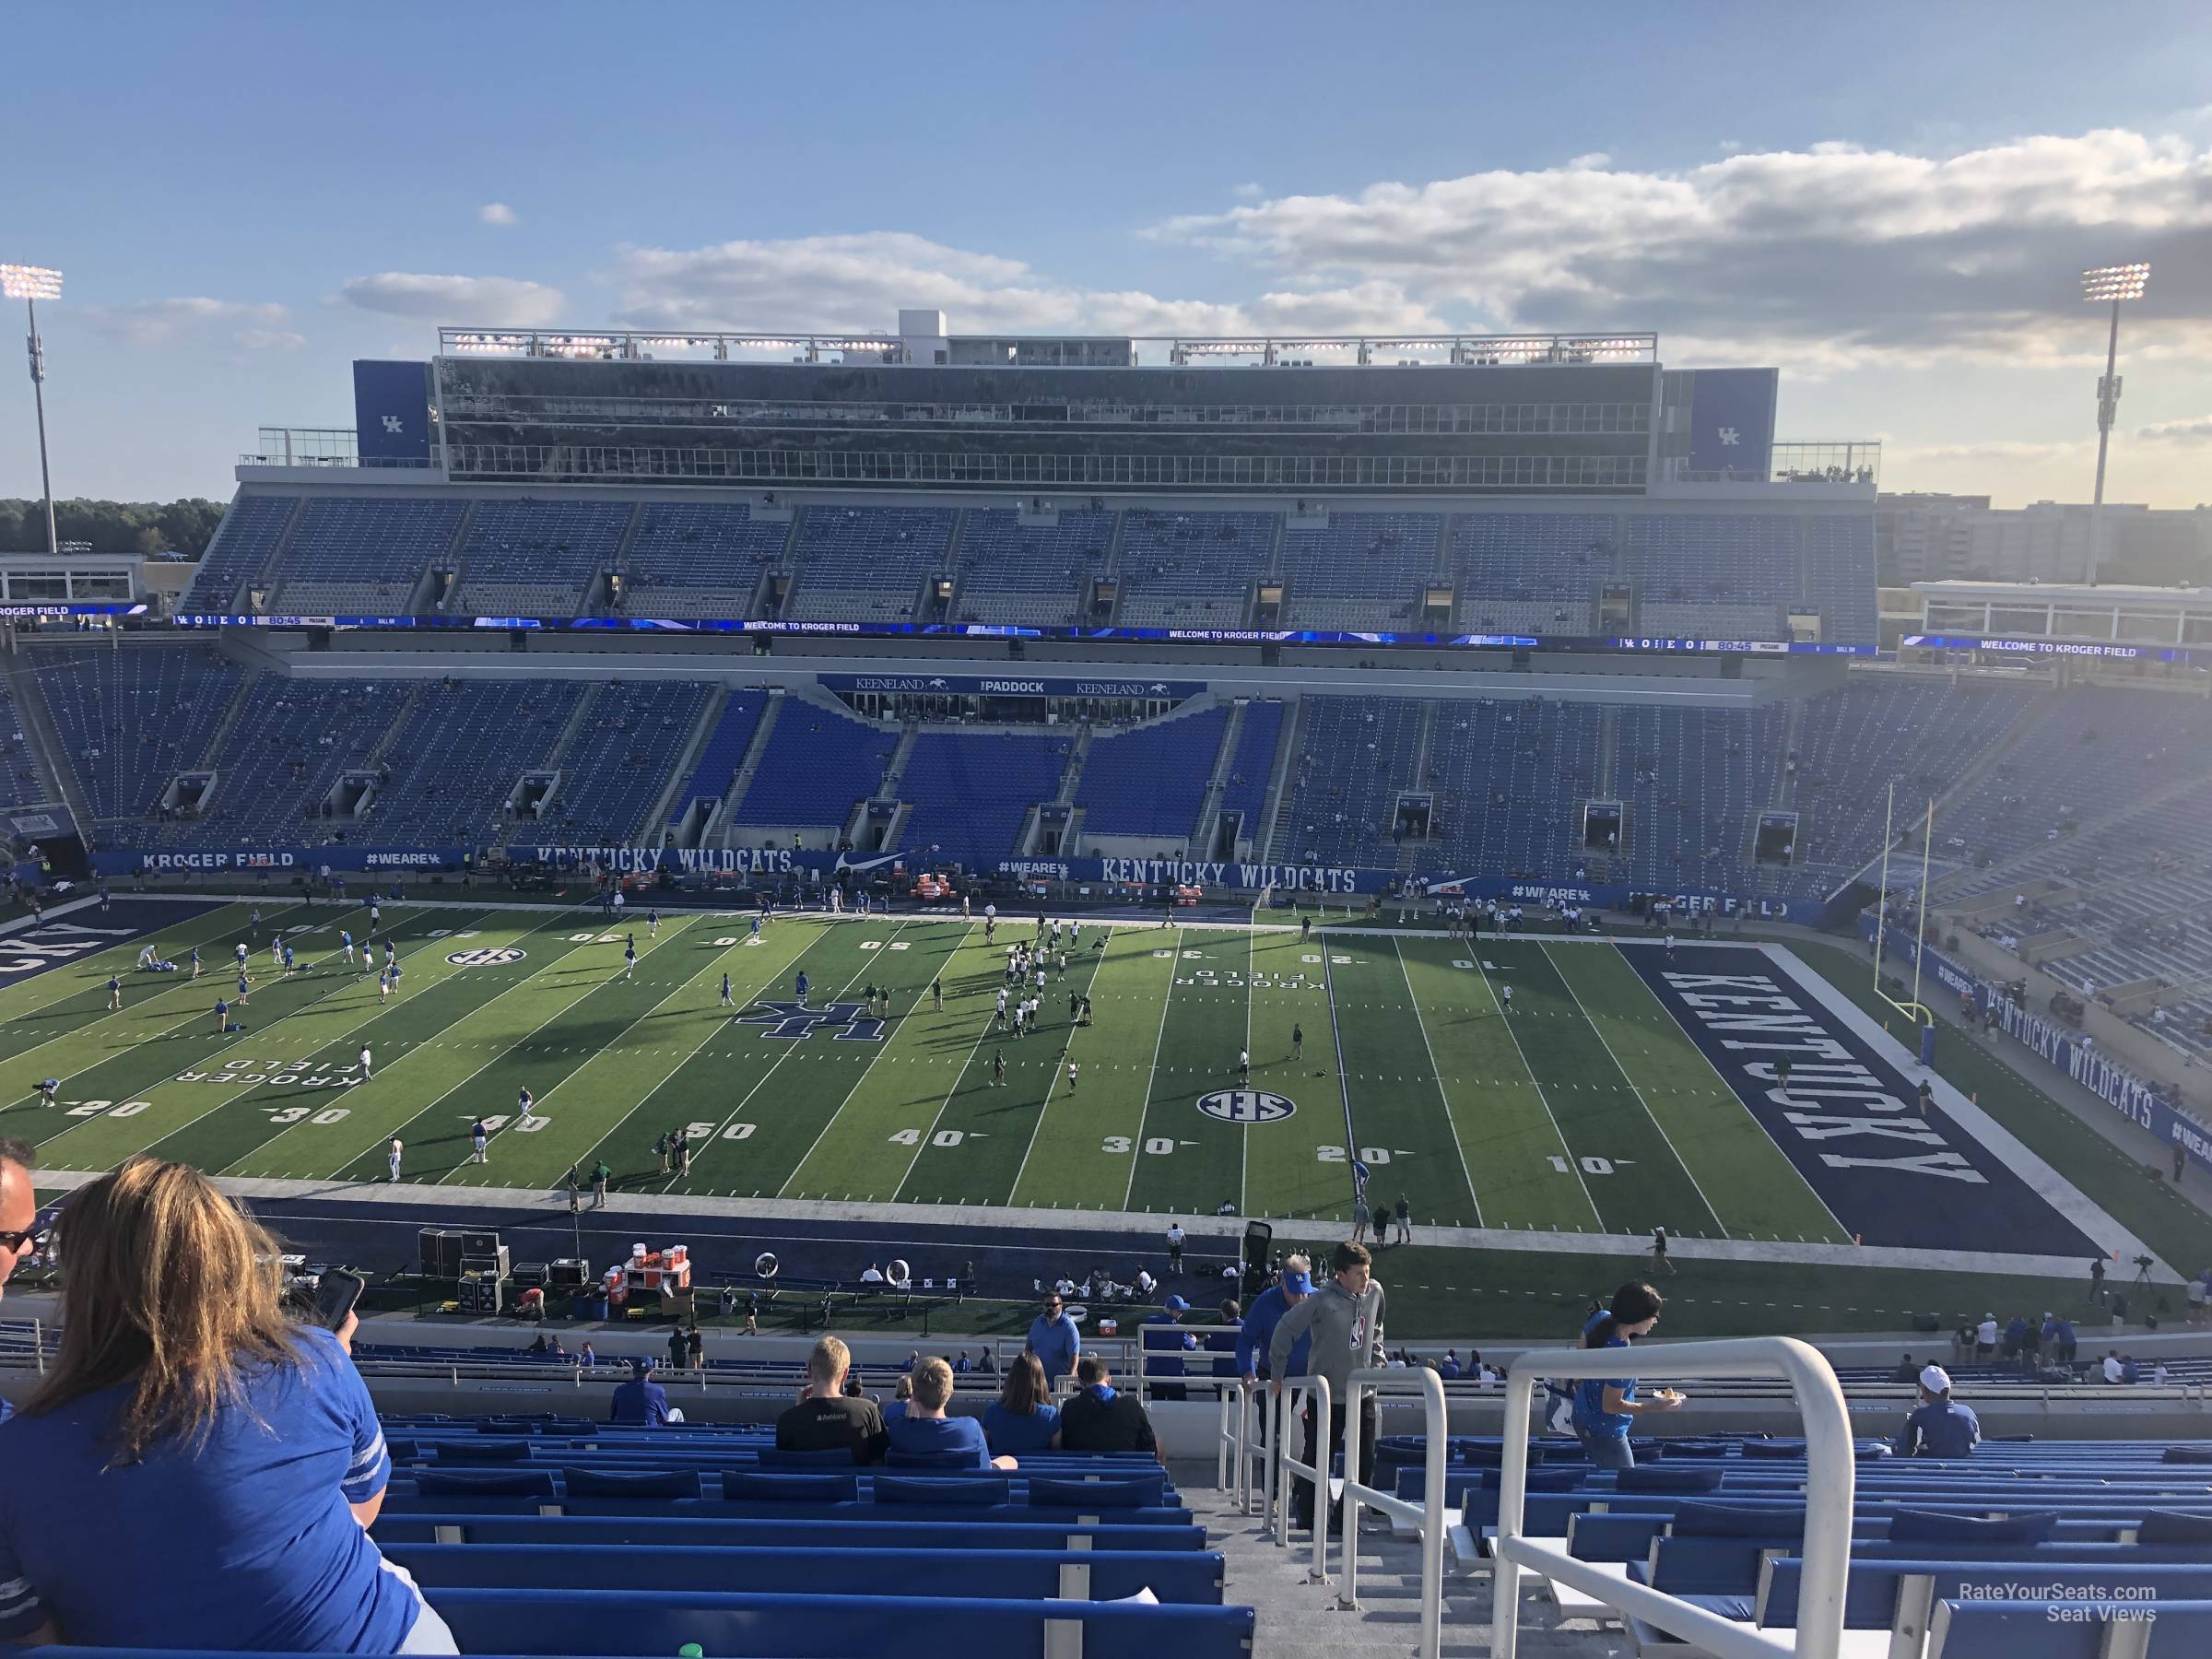 Section 207 at Kroger Field